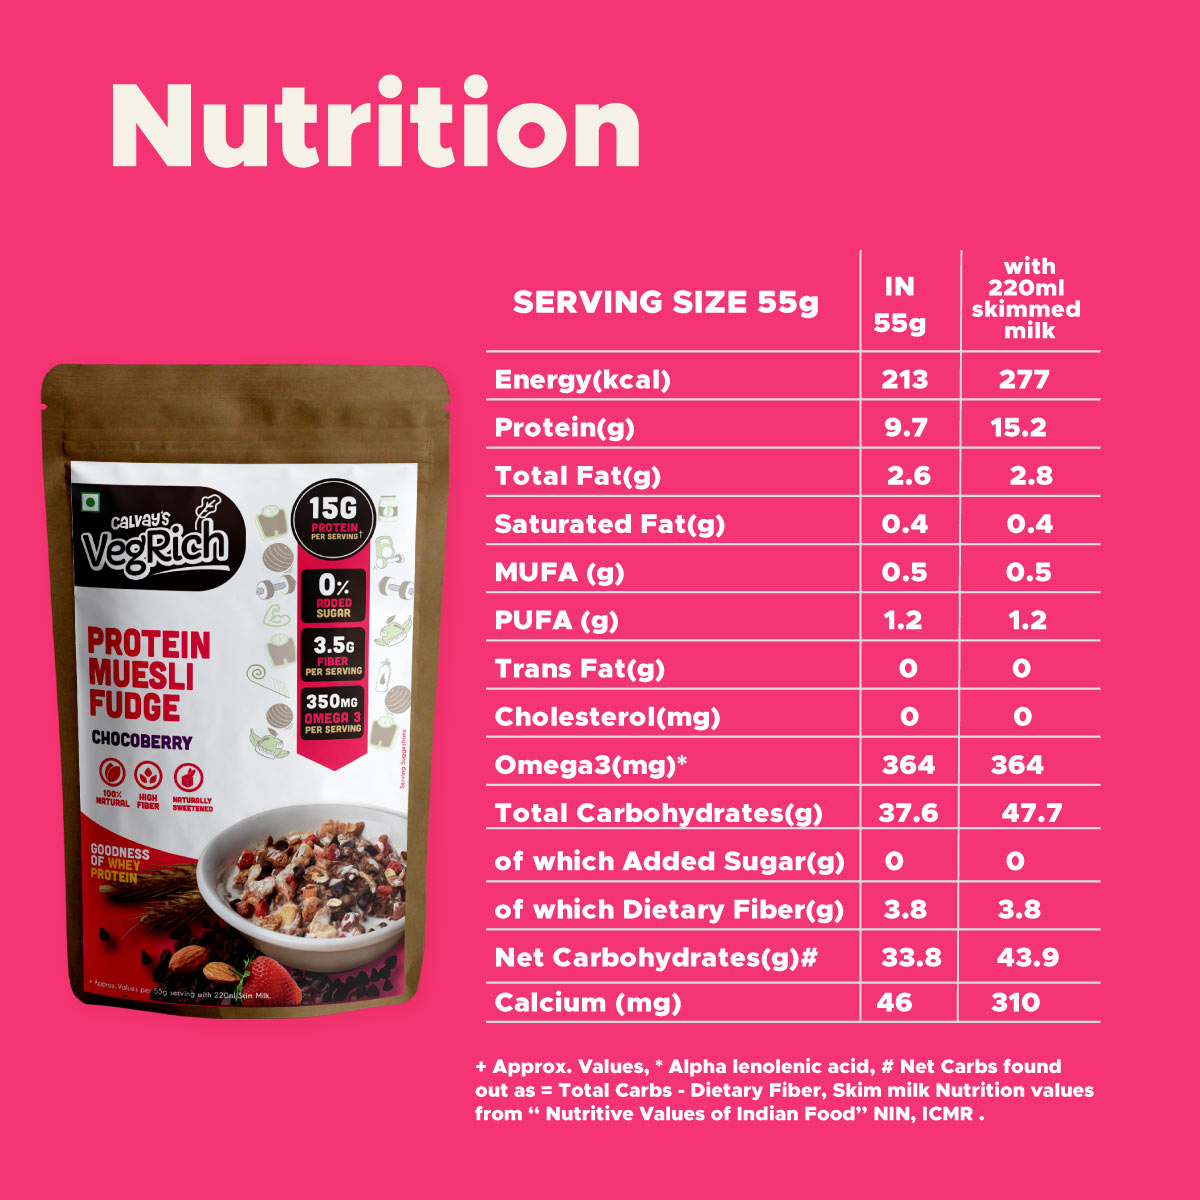 Nutrition information for protein muesli chocoberry